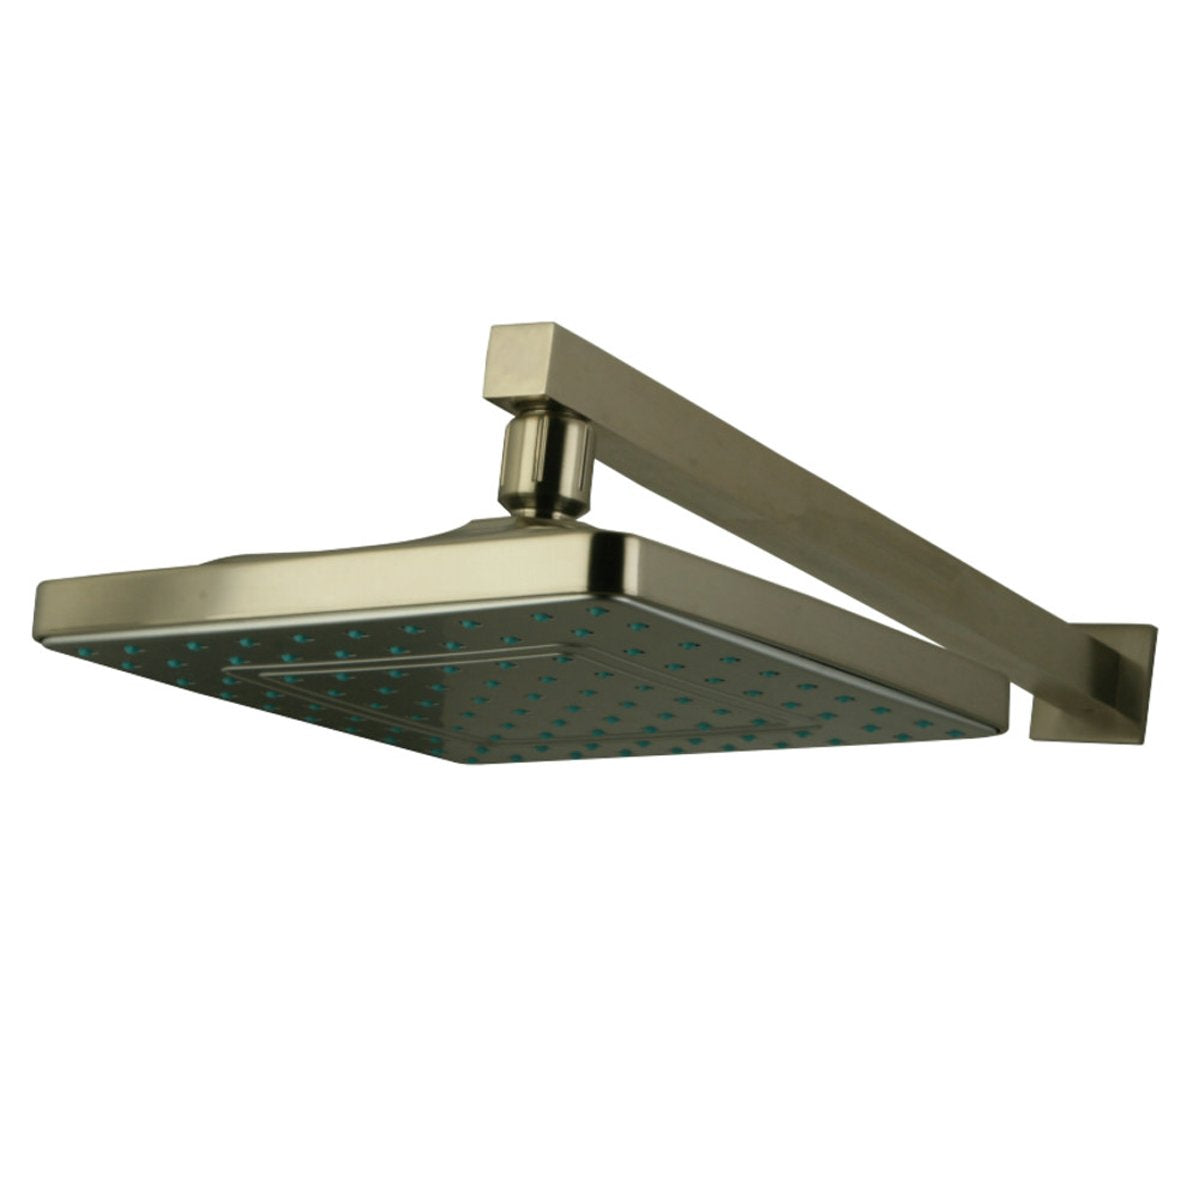 Kingston Brass KX4648CK Claremont 8" Rainfall Square Showerhead with 16" Shower Arm in Brushed Nickel